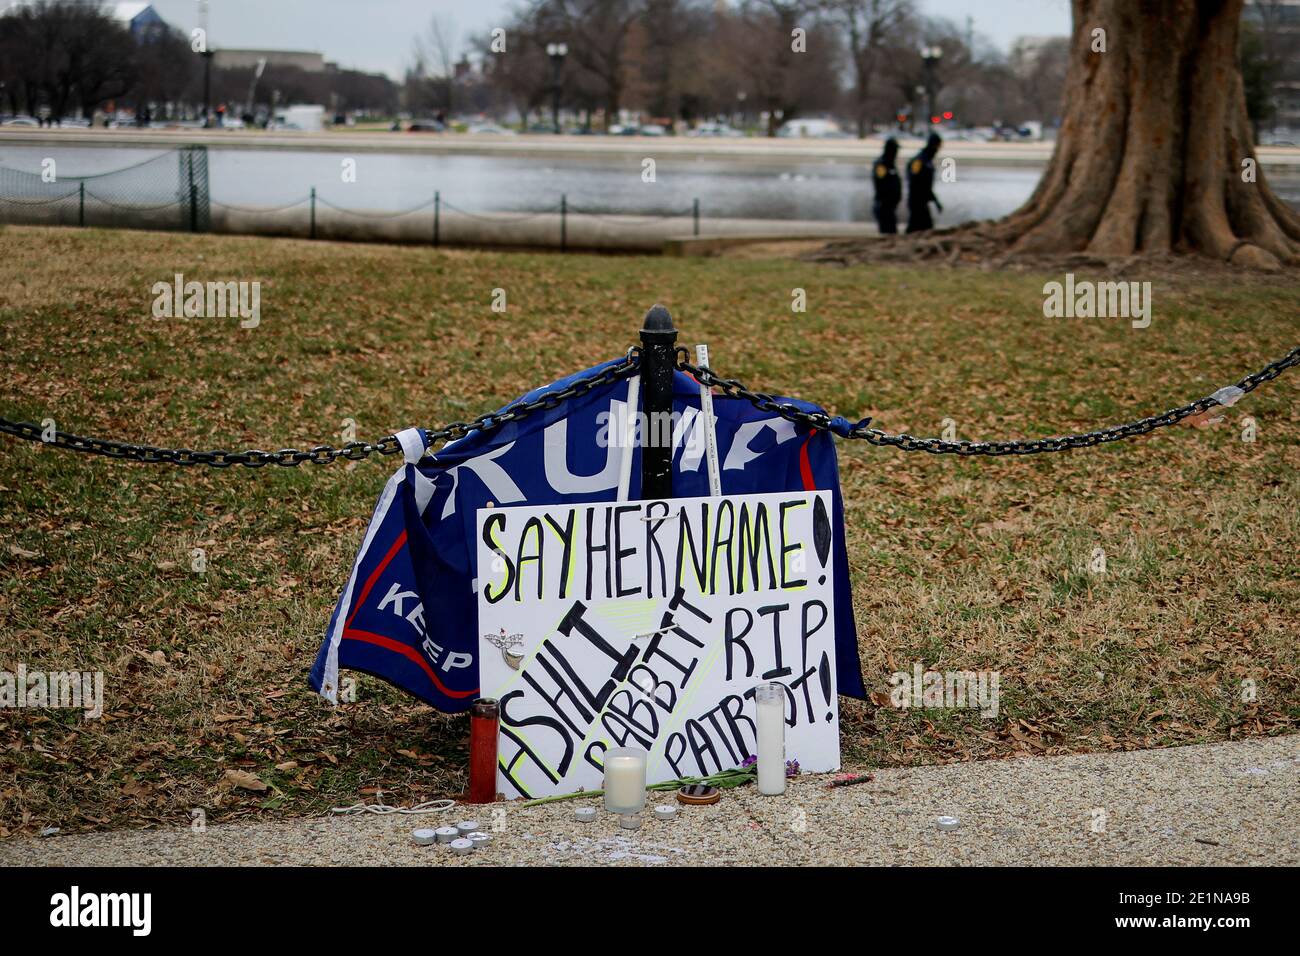 A makeshift memorial in memory of Ashli Babbitt, who was killed during Wednesday's assault on the U.S. Capitol by a mob seeking to overturn President Donald Trump's election loss, sits near a Trump 2020 campaign banner on the Capitol grounds days after Trump supporters stormed the building in Washington, U.S., January 8, 2021. REUTERS/Carlos Barria Stock Photo